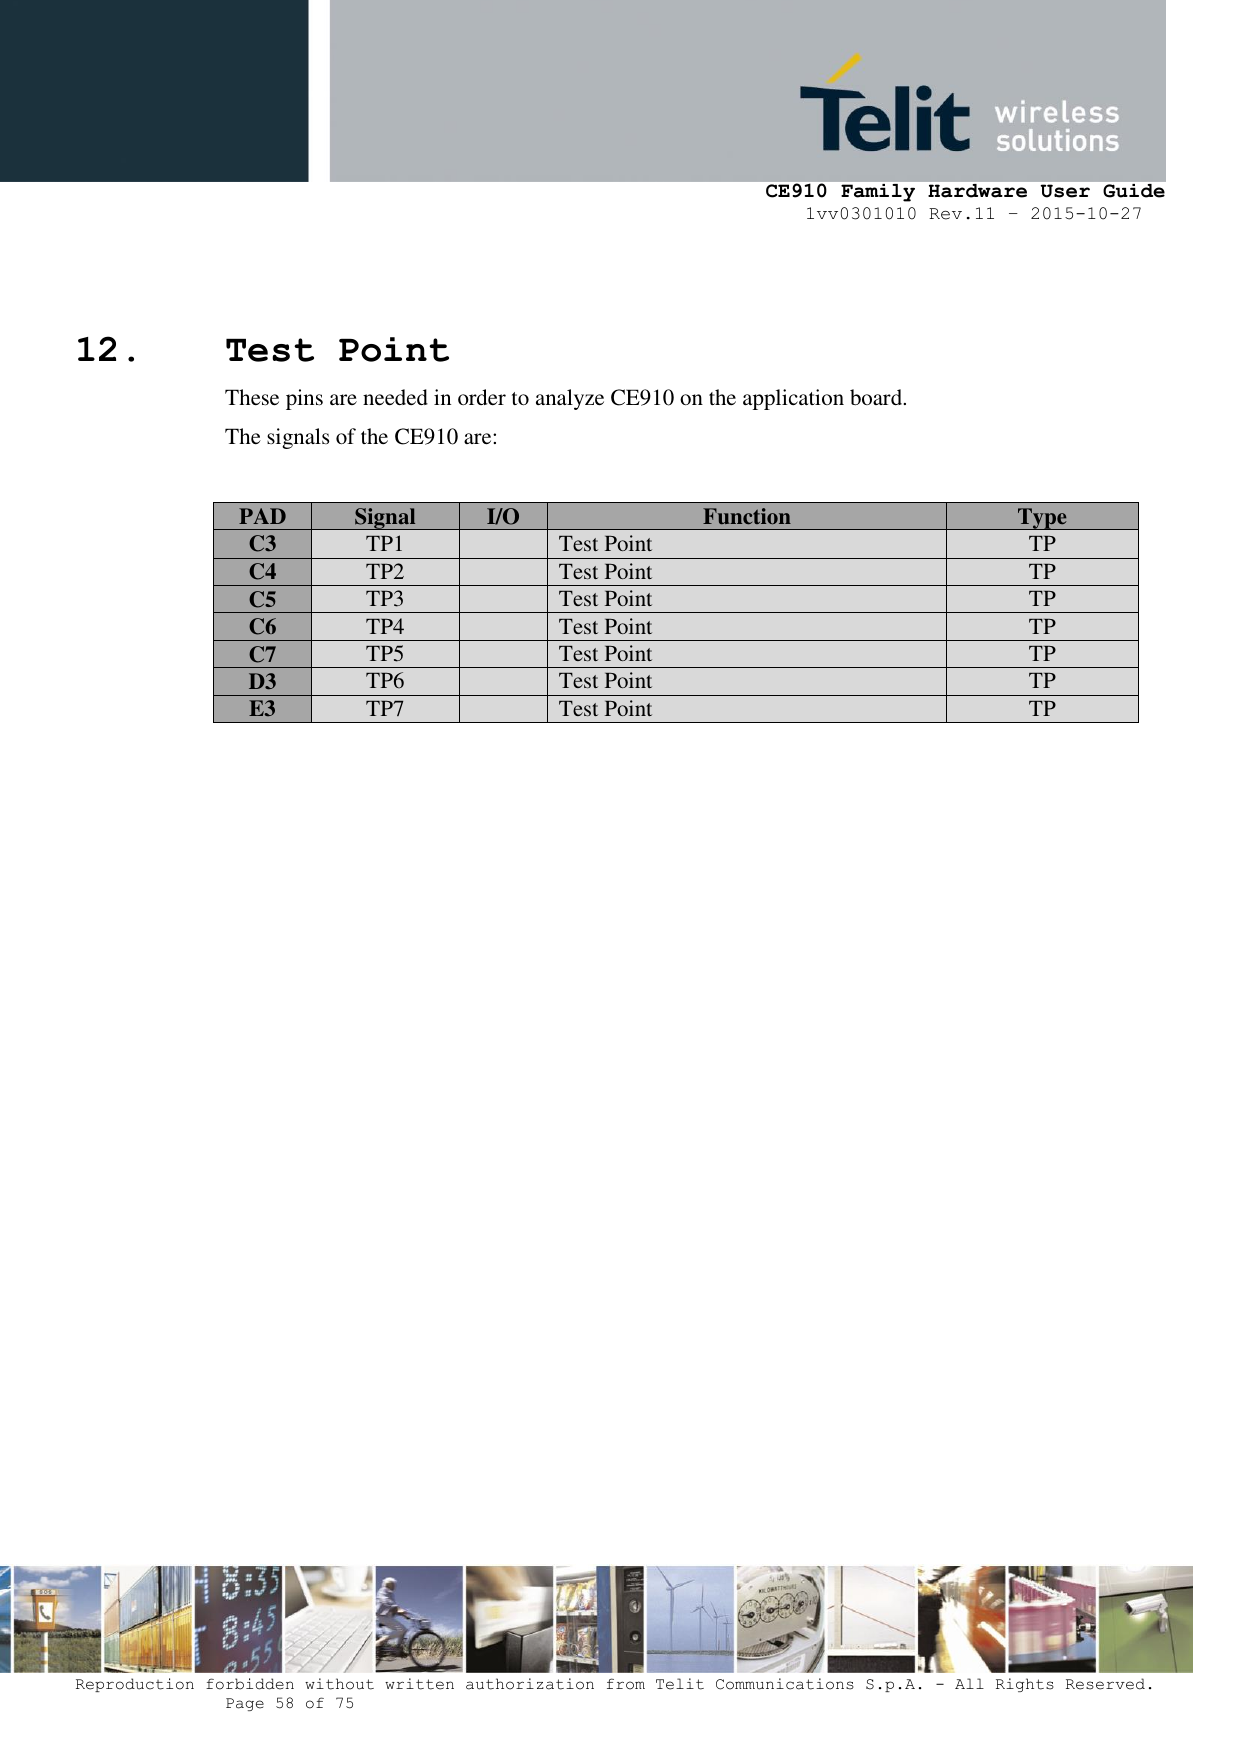     CE910 Family Hardware User Guide 1vv0301010 Rev.11 – 2015-10-27 Reproduction forbidden without written authorization from Telit Communications S.p.A. - All Rights Reserved.    Page 58 of 75                                                     12. Test Point These pins are needed in order to analyze CE910 on the application board. The signals of the CE910 are:  PAD Signal I/O Function Type C3 TP1  Test Point TP C4 TP2  Test Point TP C5 TP3  Test Point TP C6 TP4  Test Point TP C7 TP5  Test Point TP D3 TP6  Test Point TP E3 TP7  Test Point TP     